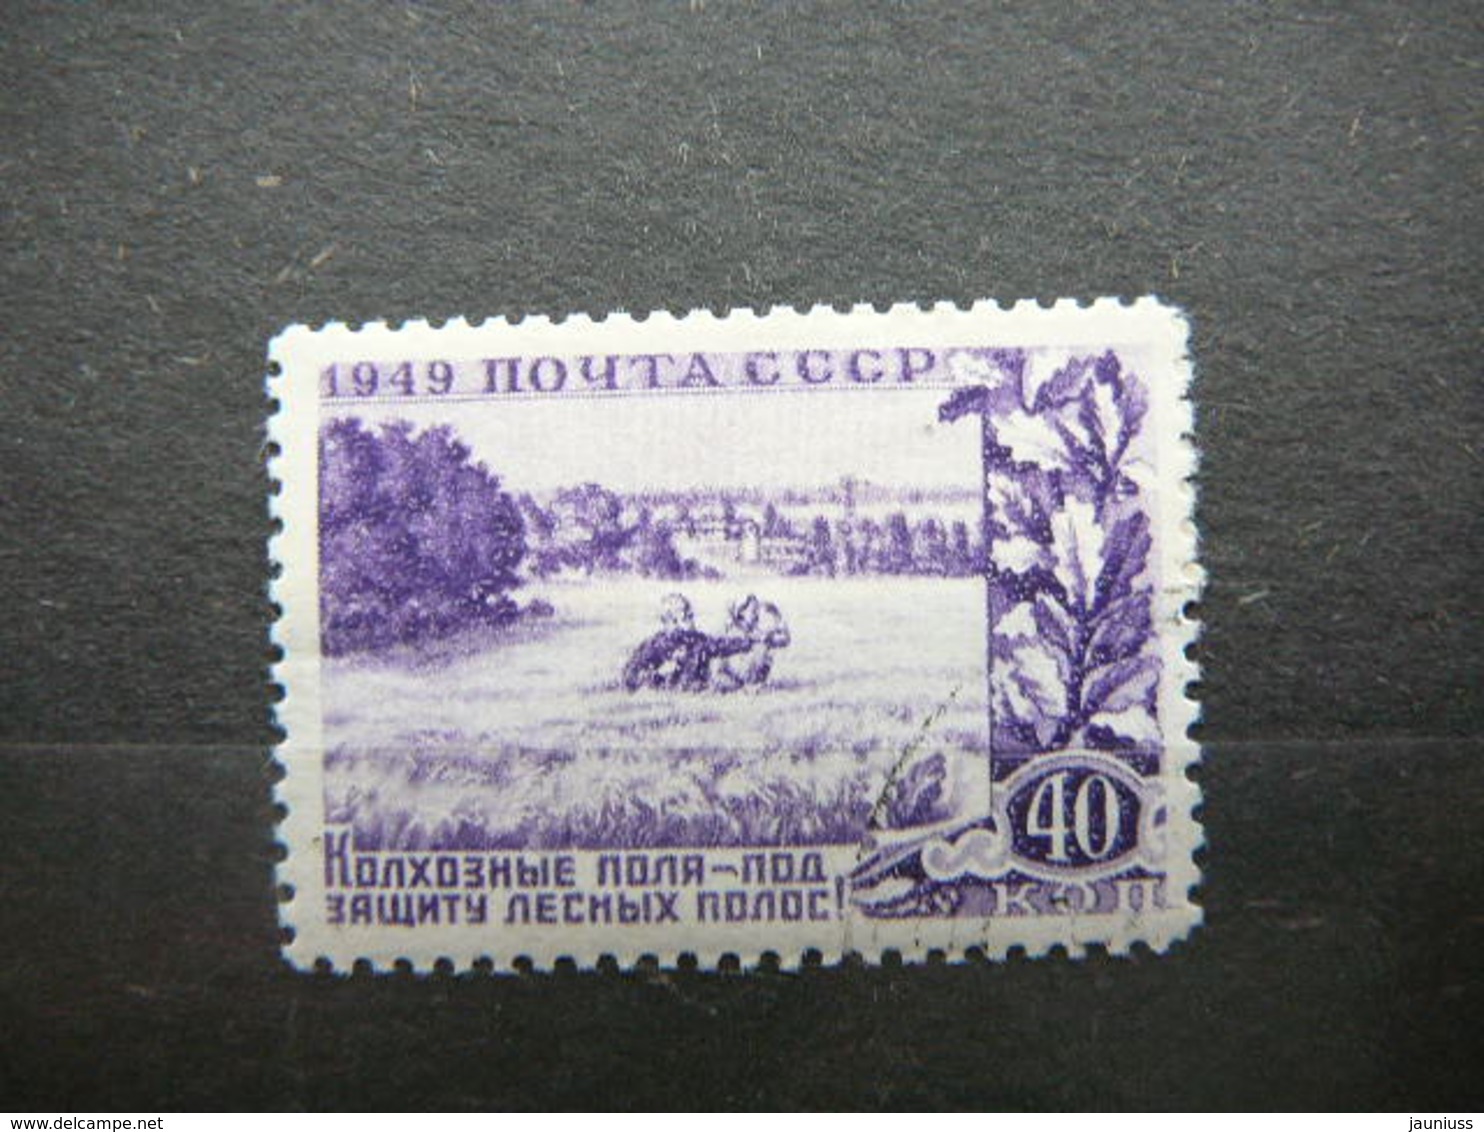 Foresty And Field Conservancy # Russia USSR Sowjetunion # 1949 Used # Mi. 1386 - Oblitérés